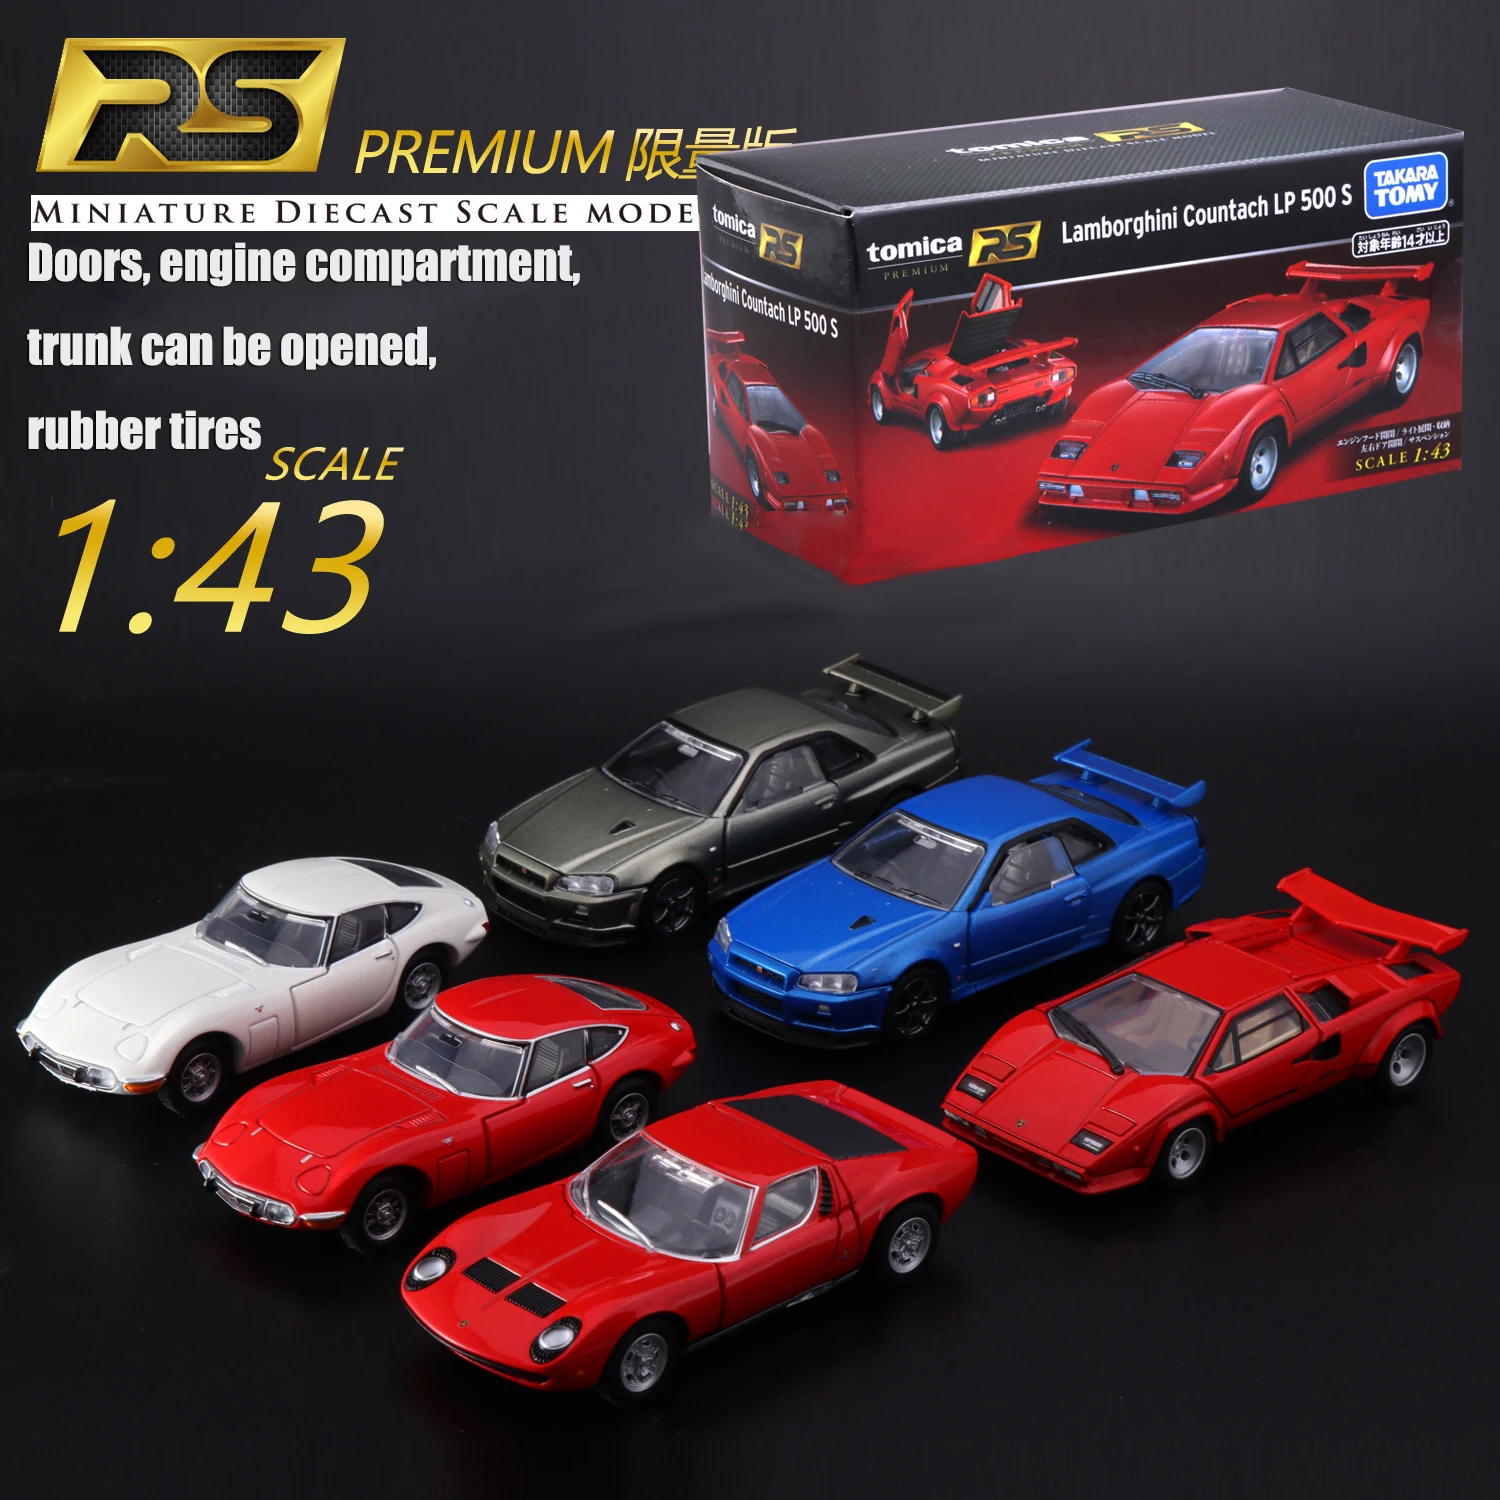 

Takara Tomy Tomica Premium RS 1/43 Toyota 2000GT Diecast Model Super Car Toy Gift for Boys and Girls Children